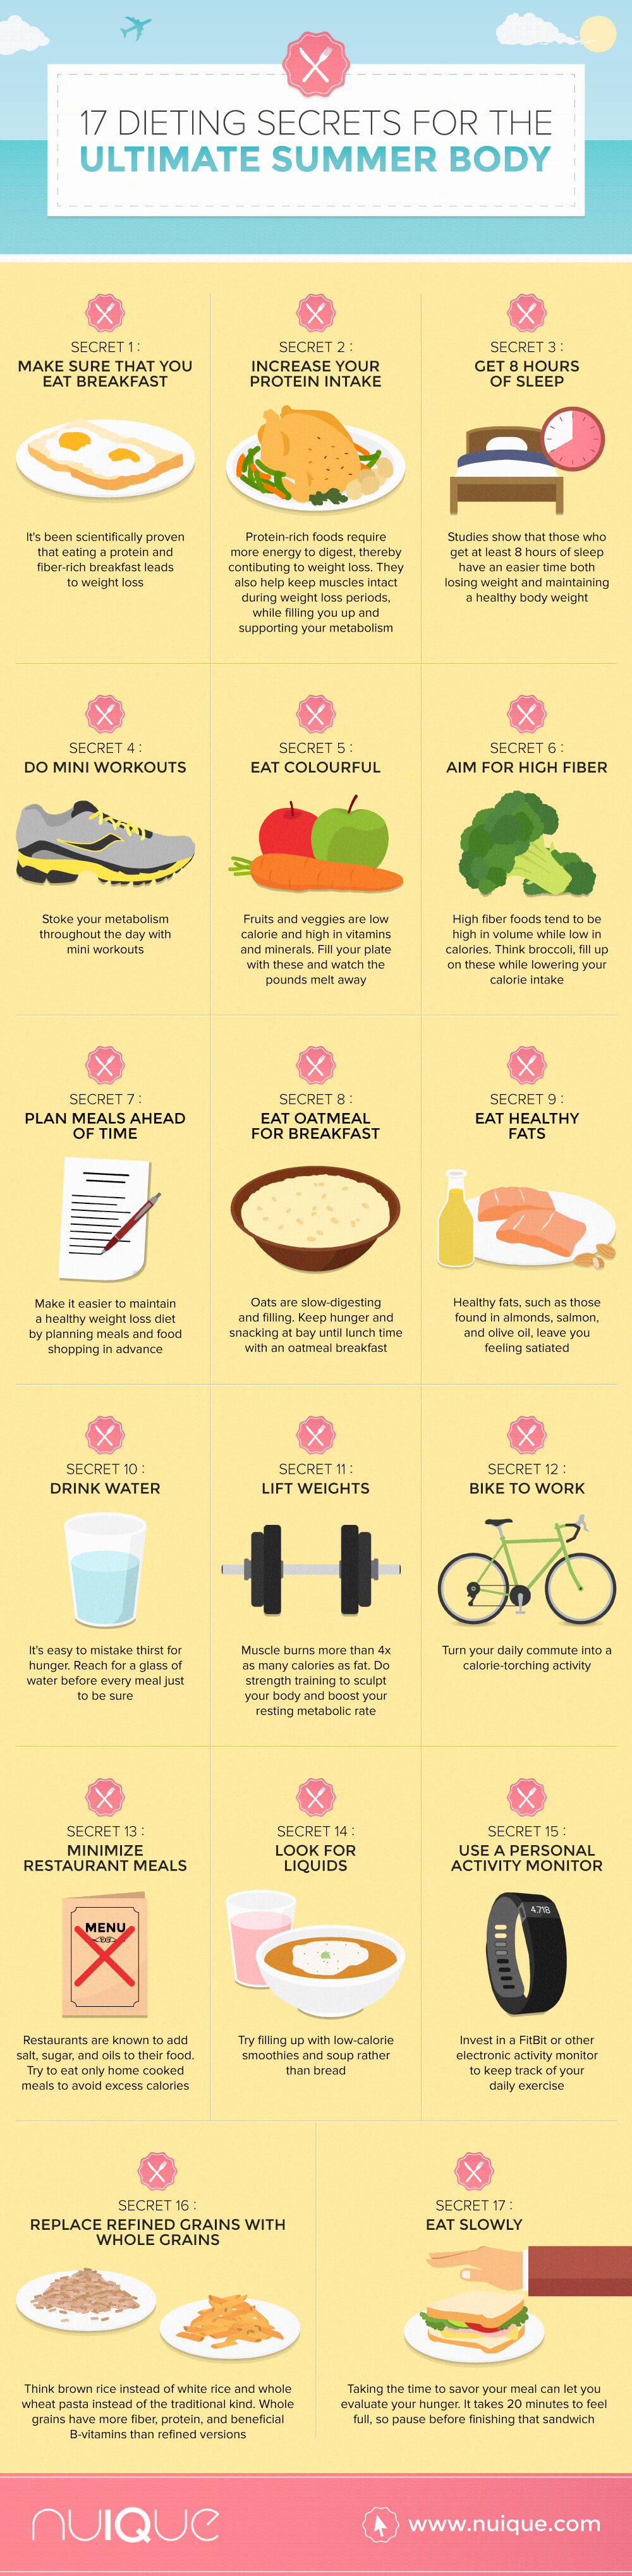 17-dieting-secrets-for-the-ultimate-summer-body-infographic